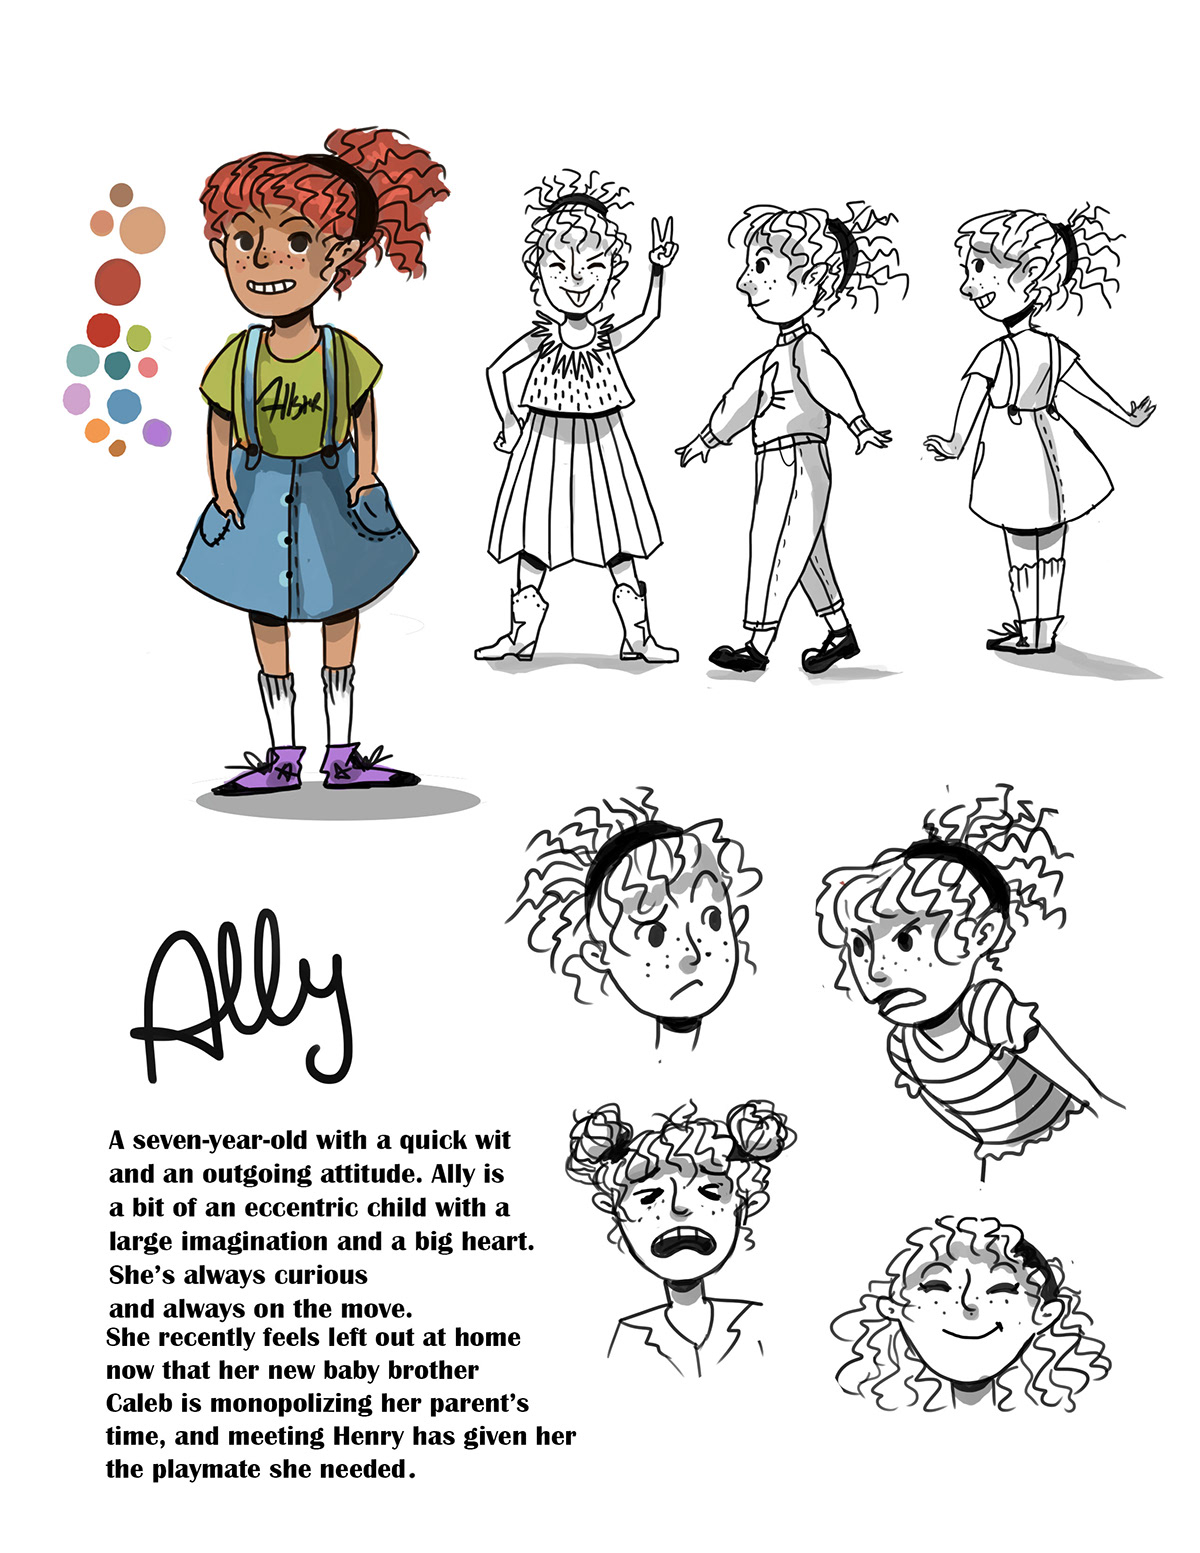 character sheets turnaround concept art Visual Development storytelling   sequential